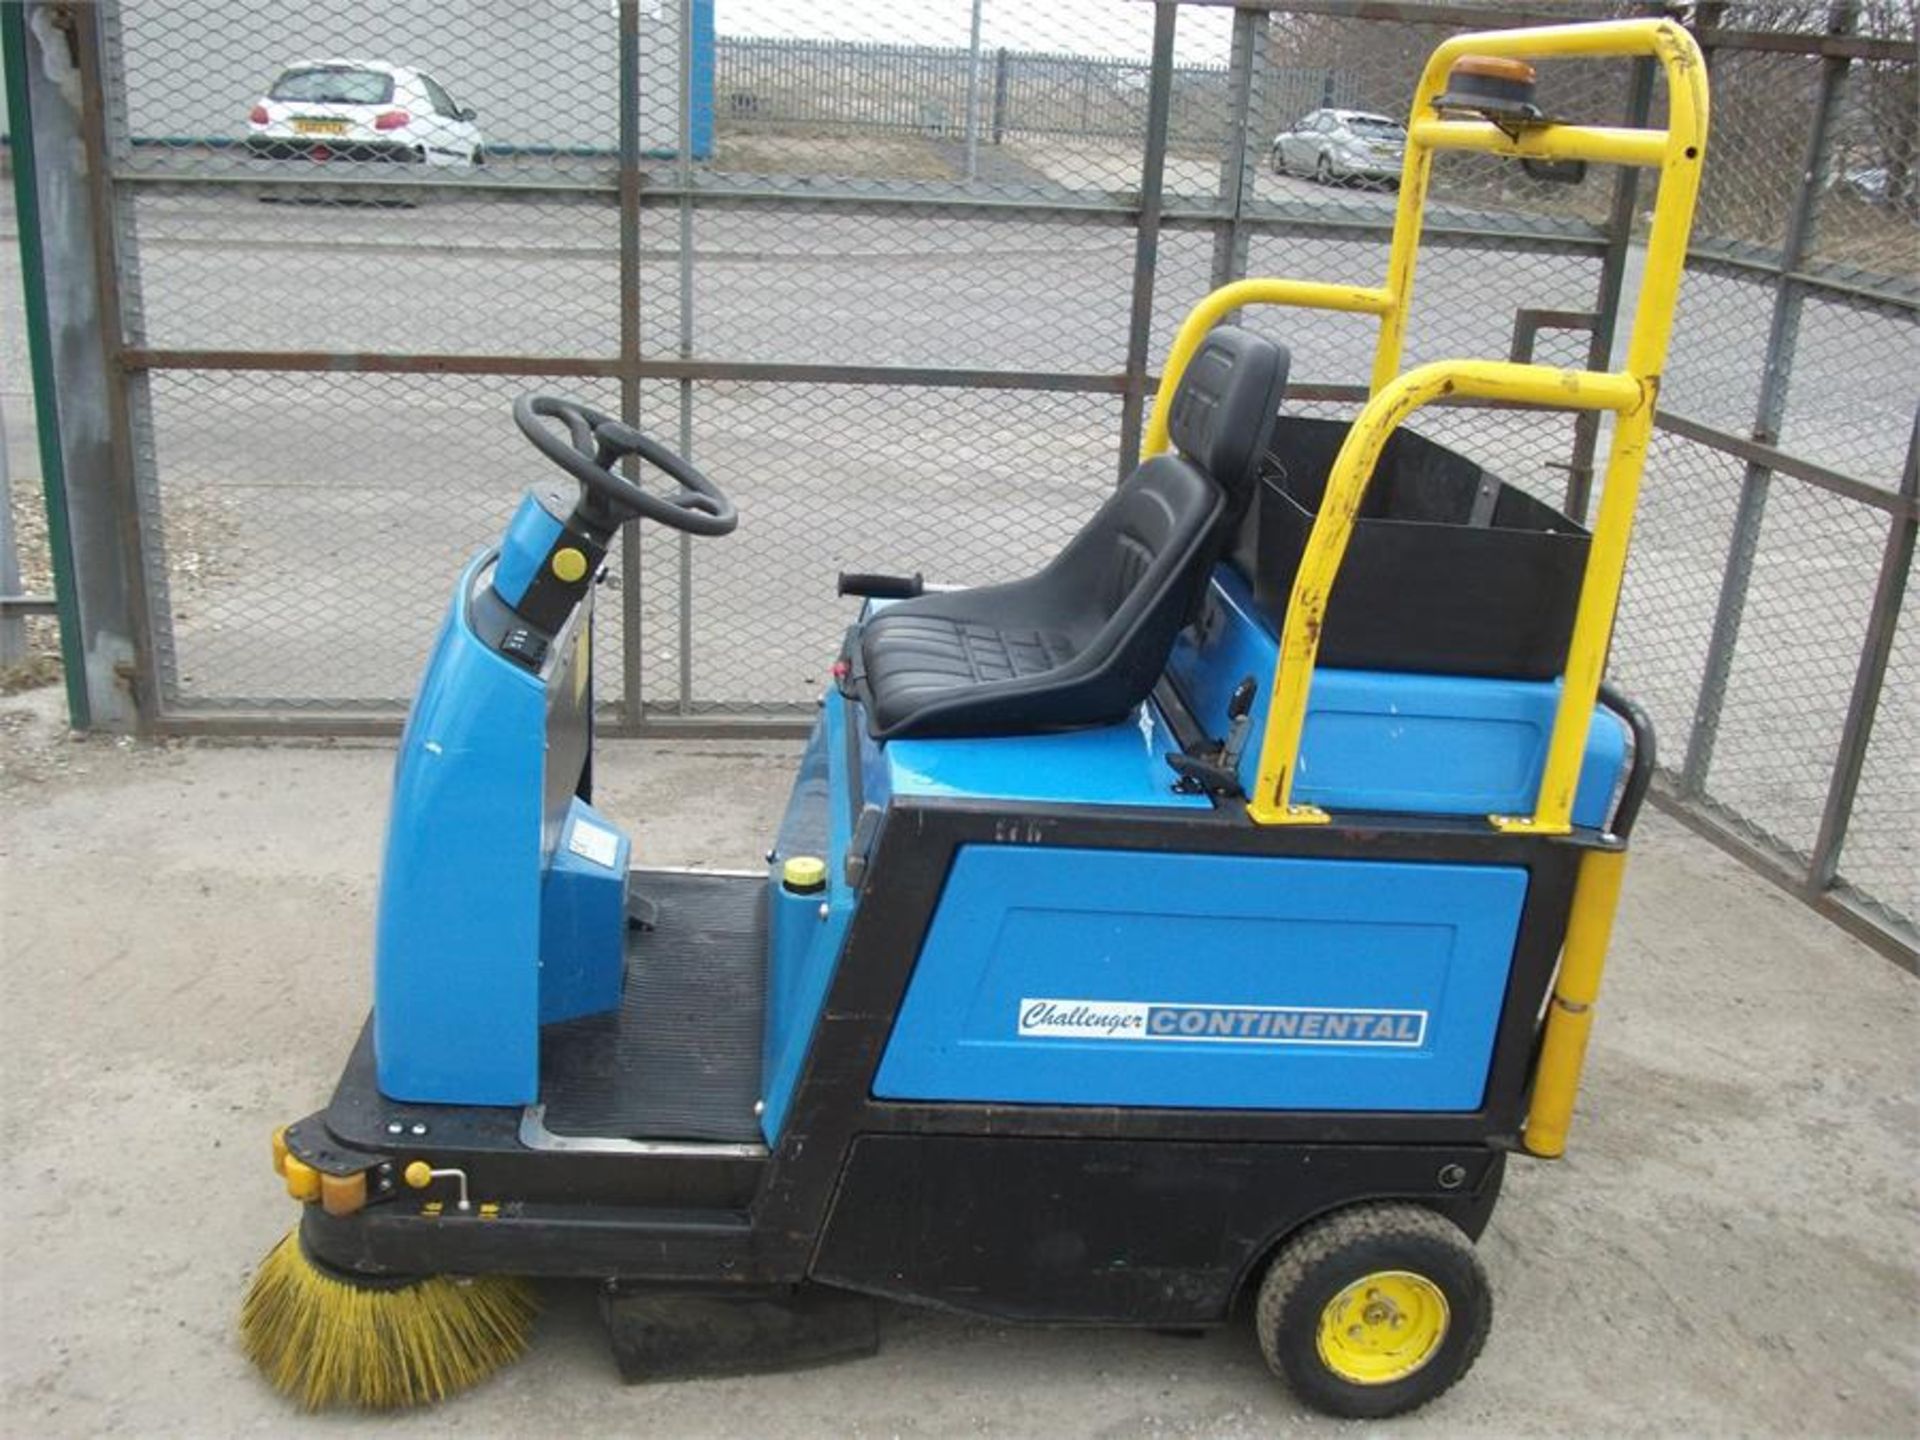 Challenger Continental 1200LM Battery Sweeper Cleaner Brush